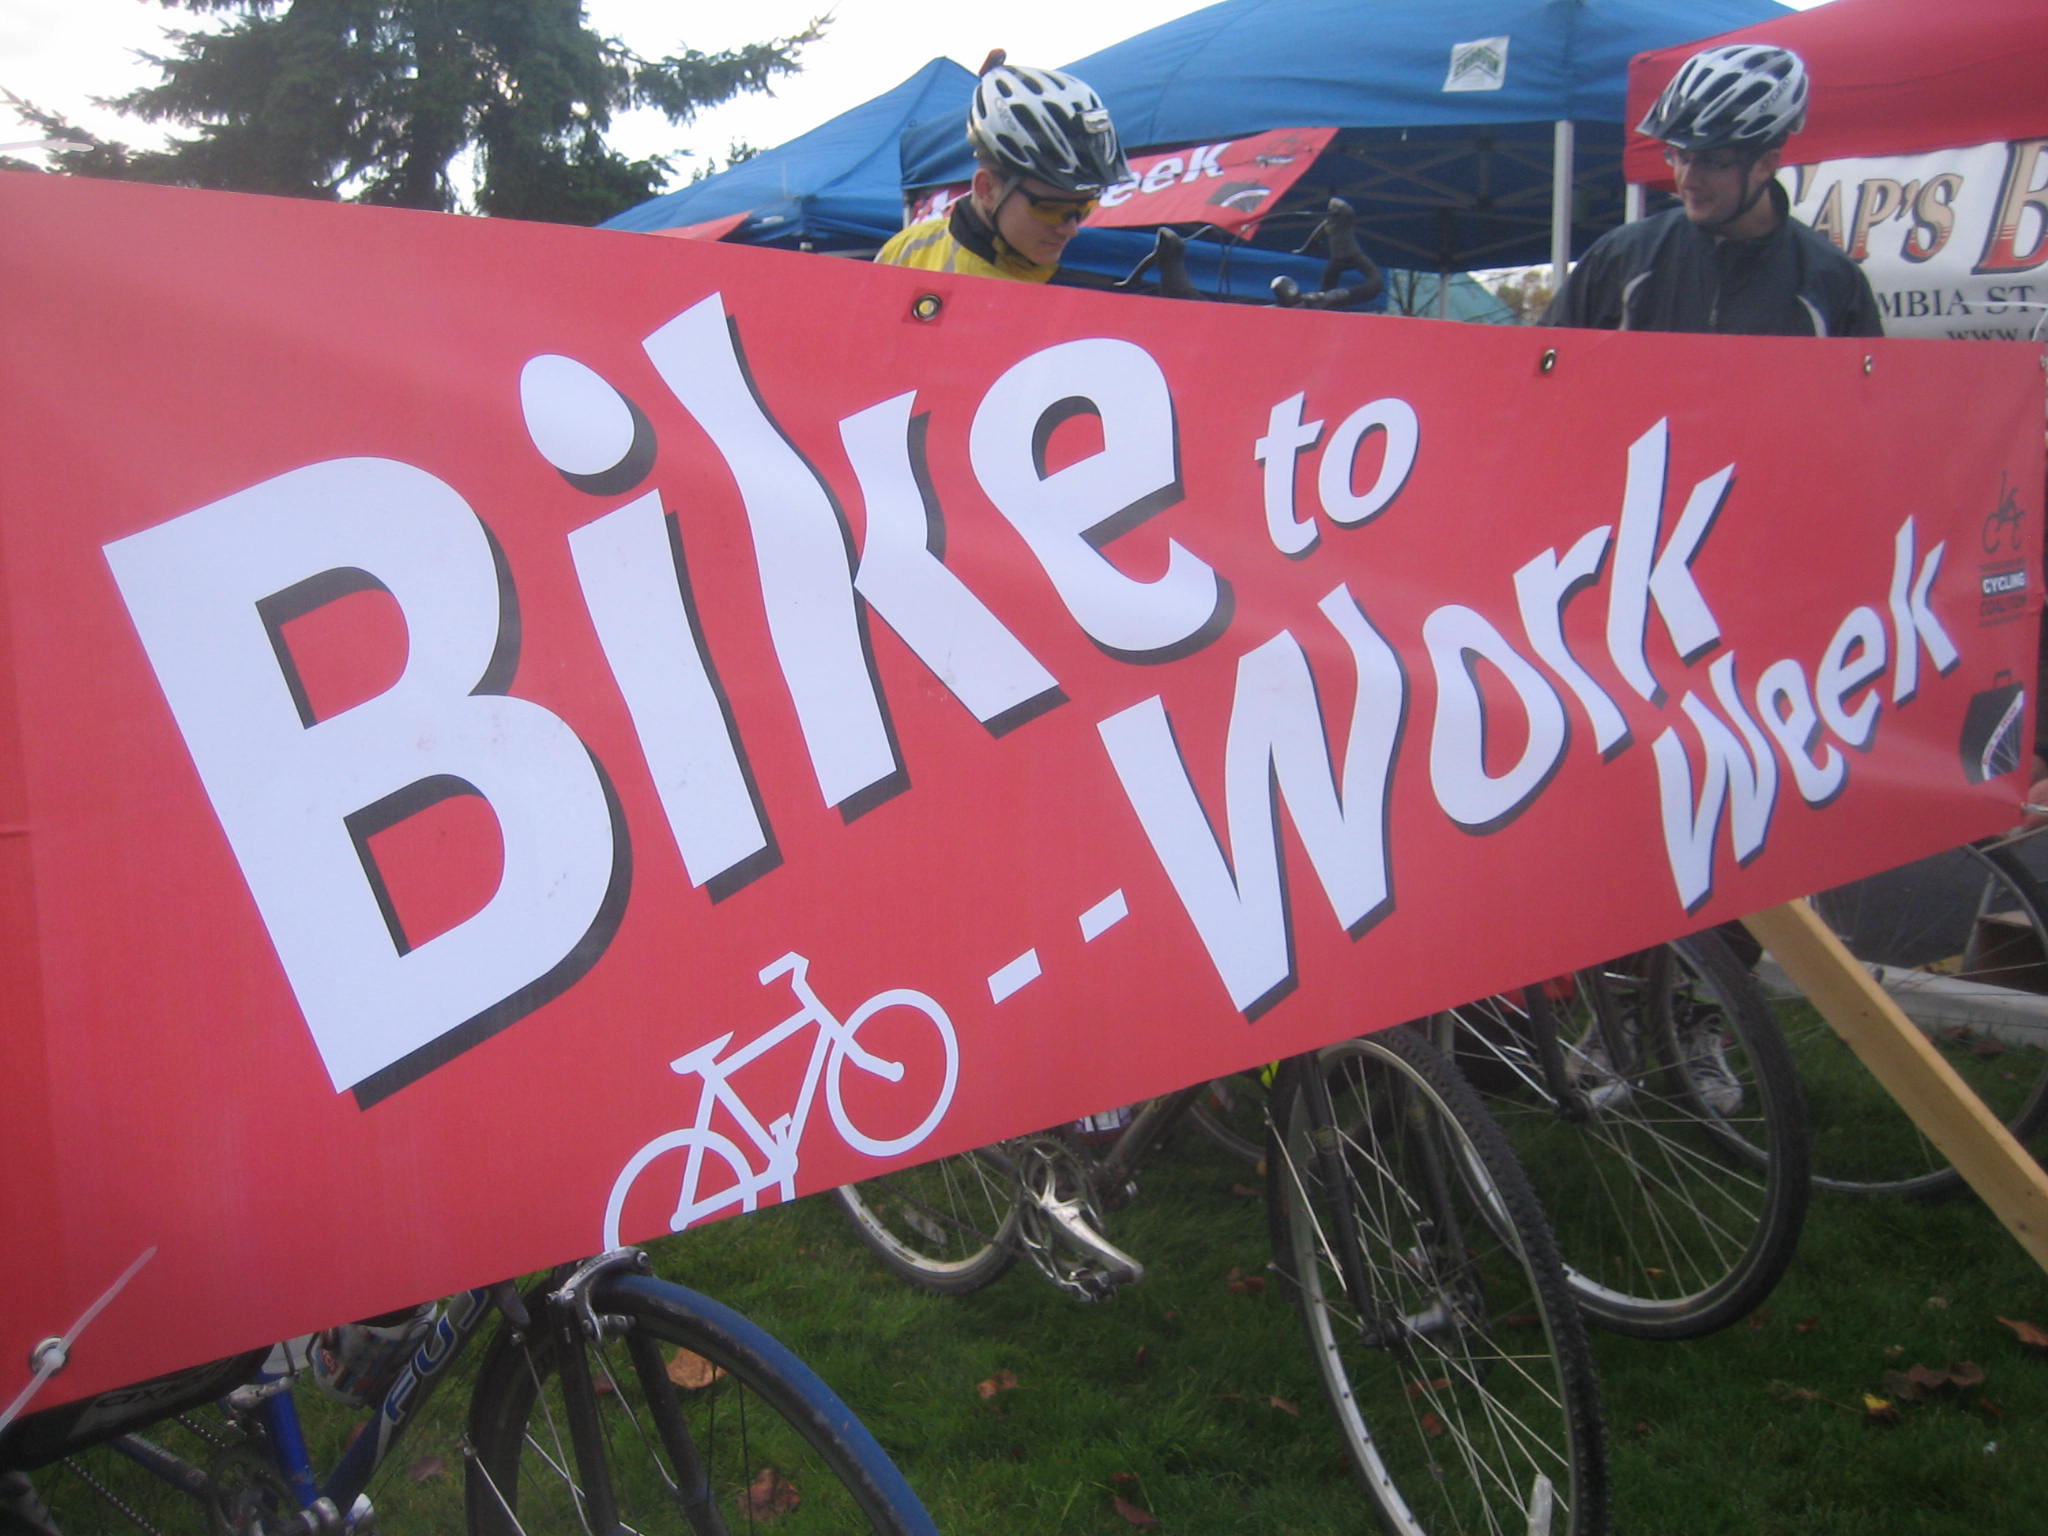 The Bike to Work Week banner at the Gilmore commuter station.